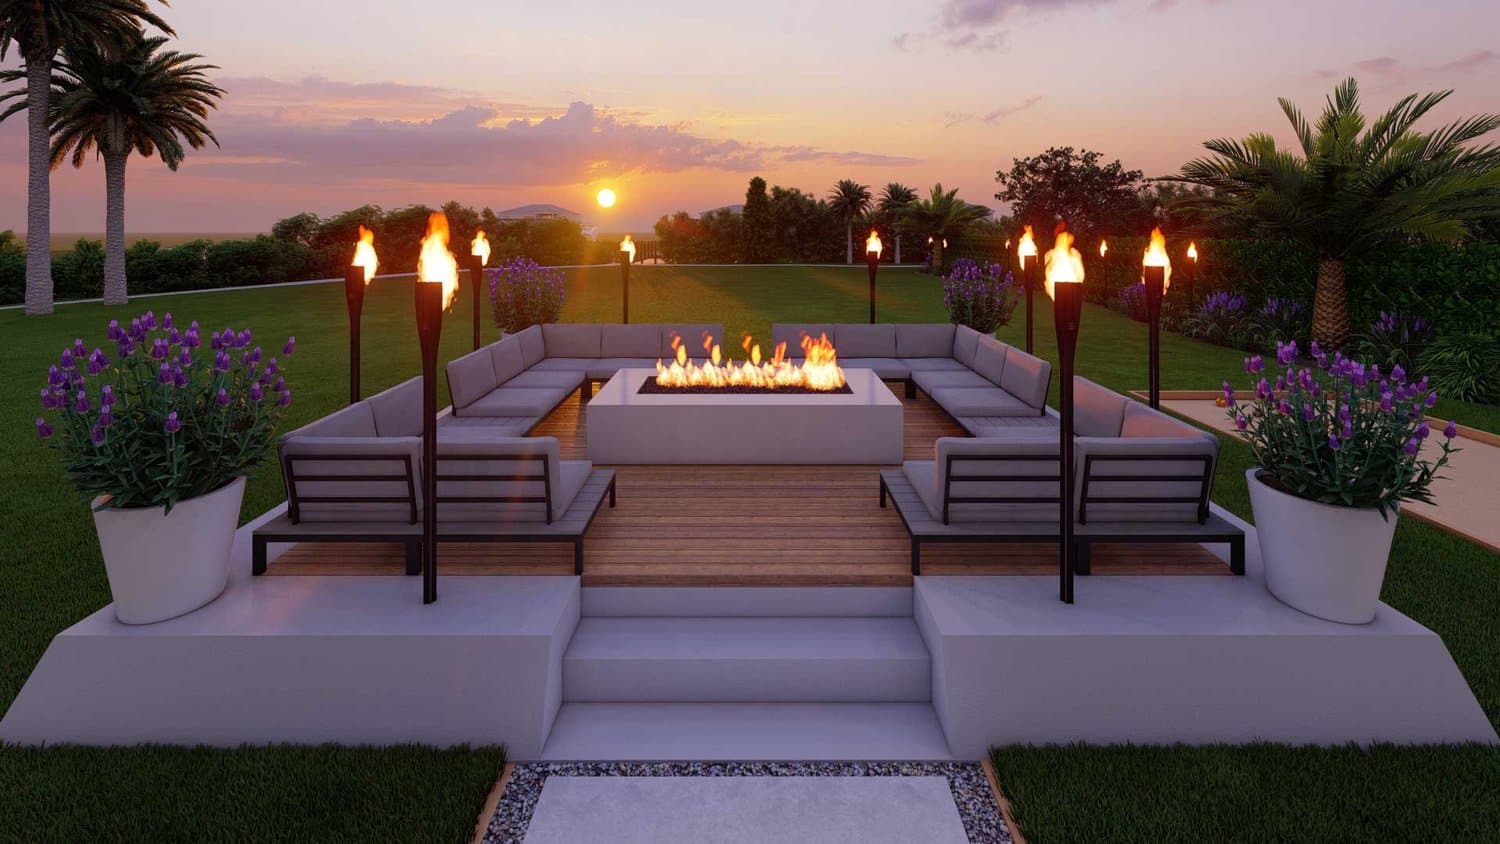 Tampa beautiful outdoor patio fire pit seating area with plant pots